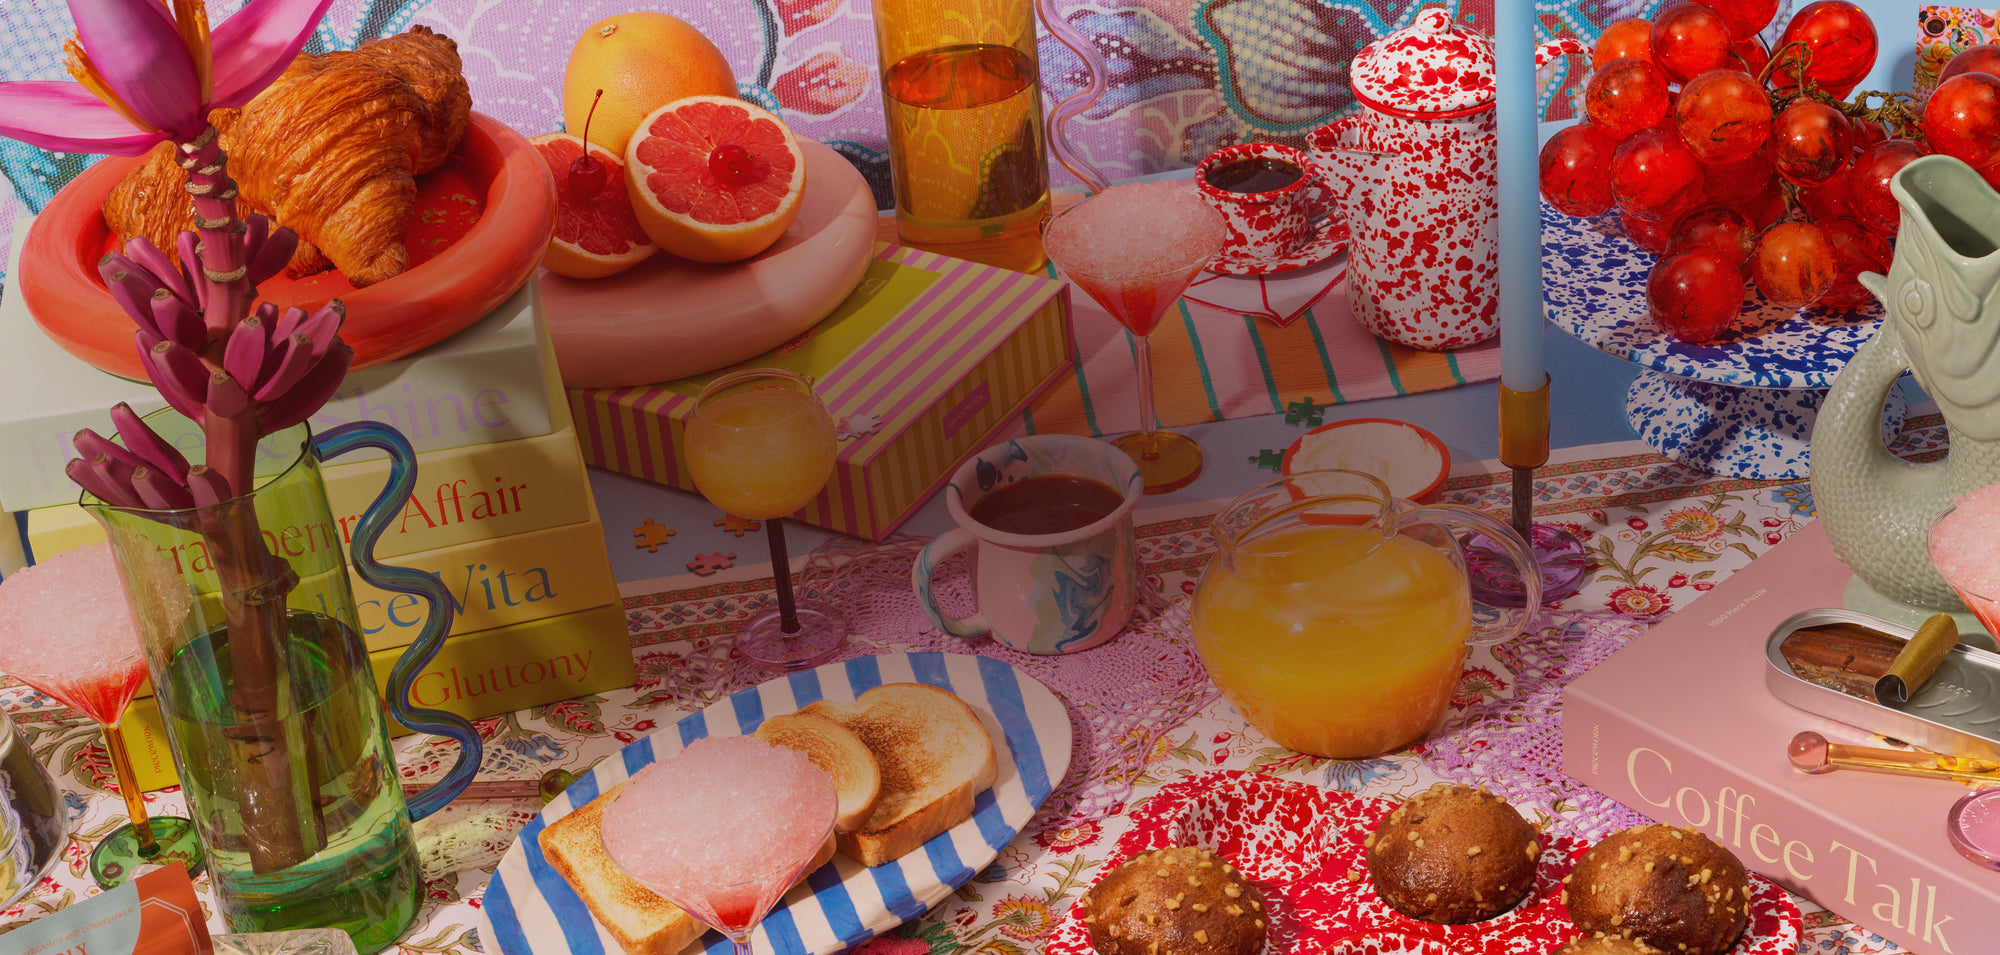 Scene of a brunch table filled with food and drink, puzzles and gift items.